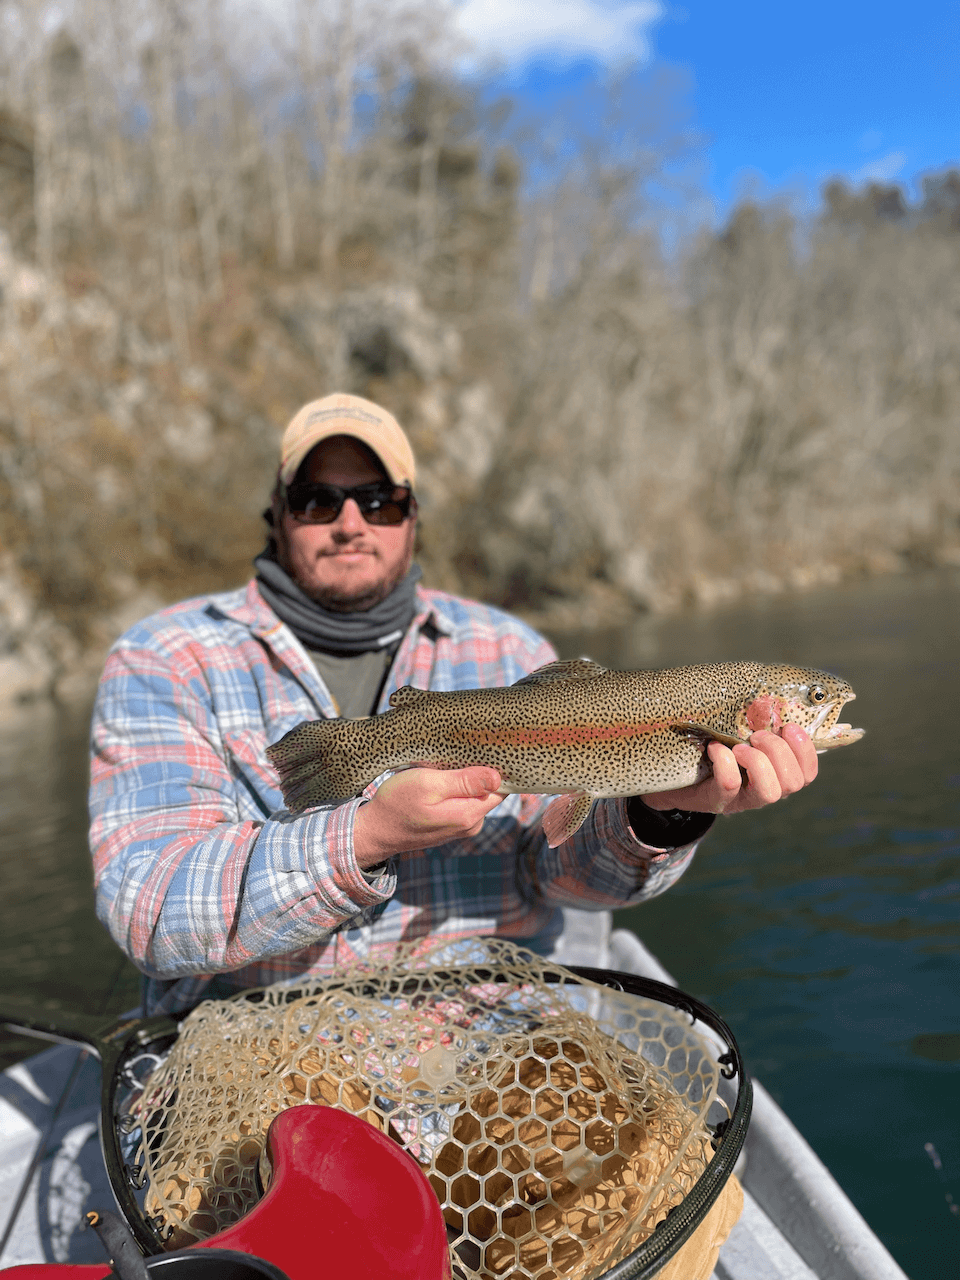 Why Winter: What's Behind the Growth in Cold-Weather Angling - Fly Fisherman